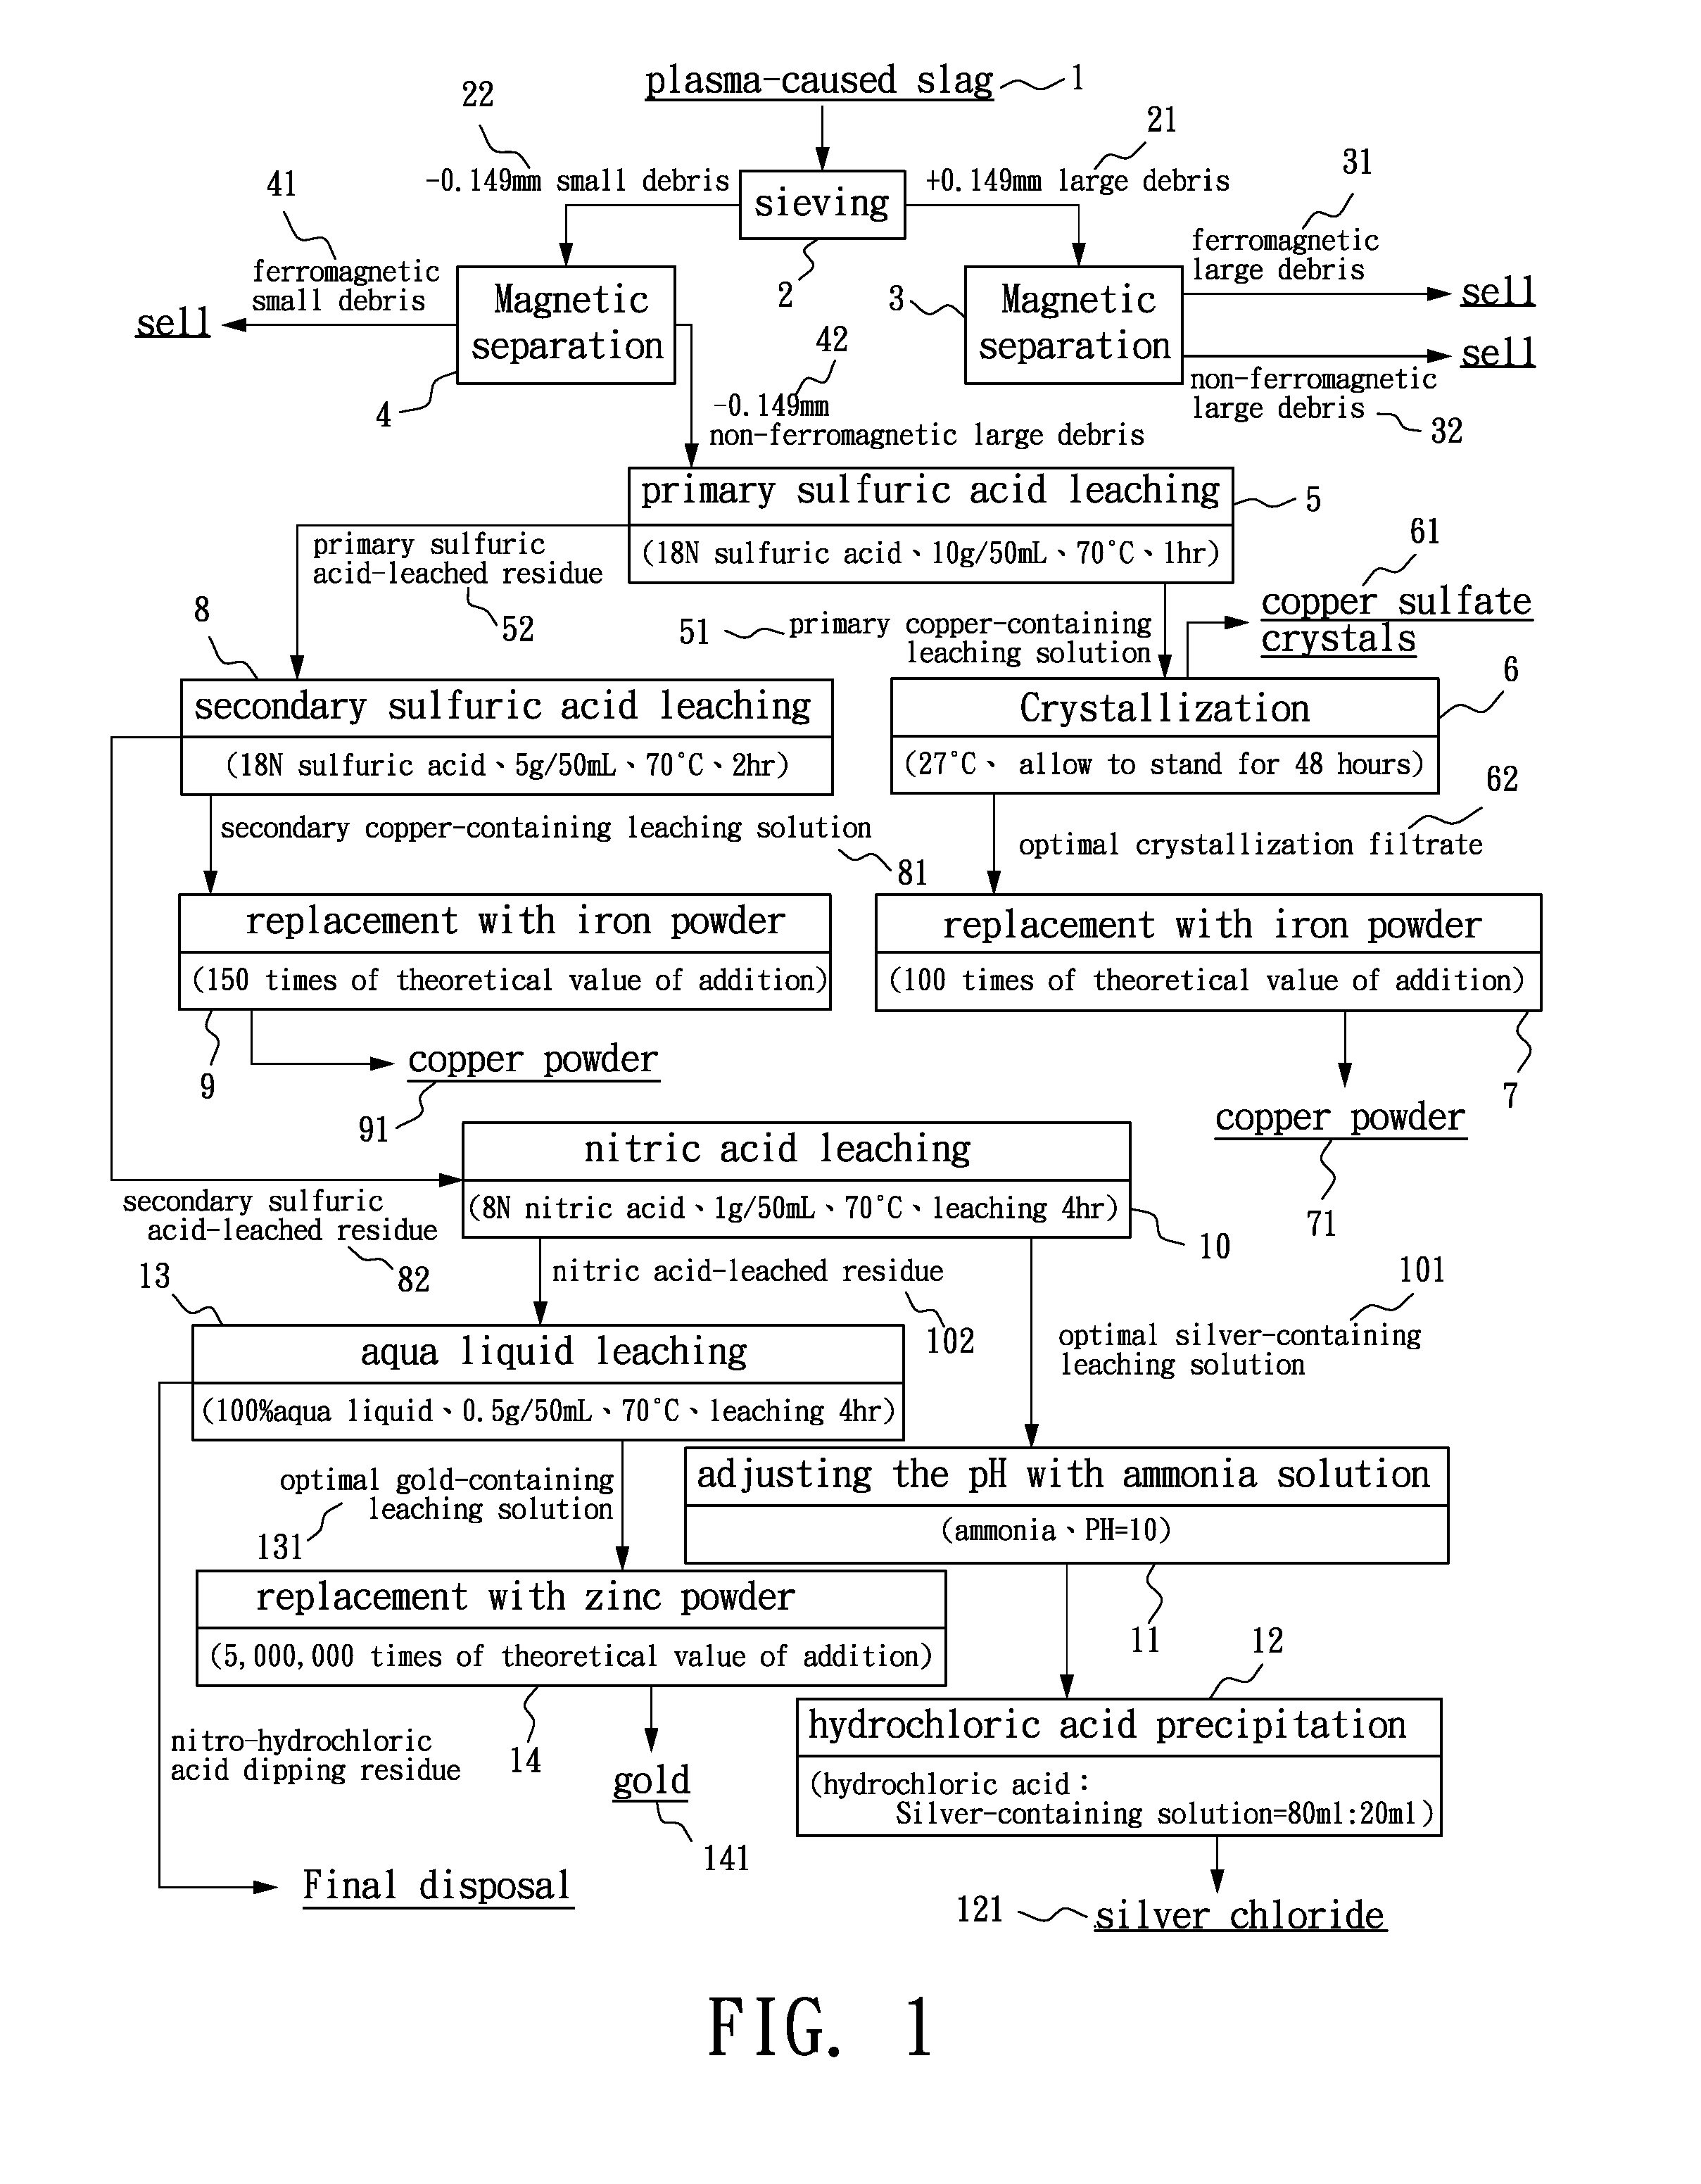 Method for Recovering Gold, Silver, Copper and Iron from Plasma-Caused Slag Containing Valuable Metals